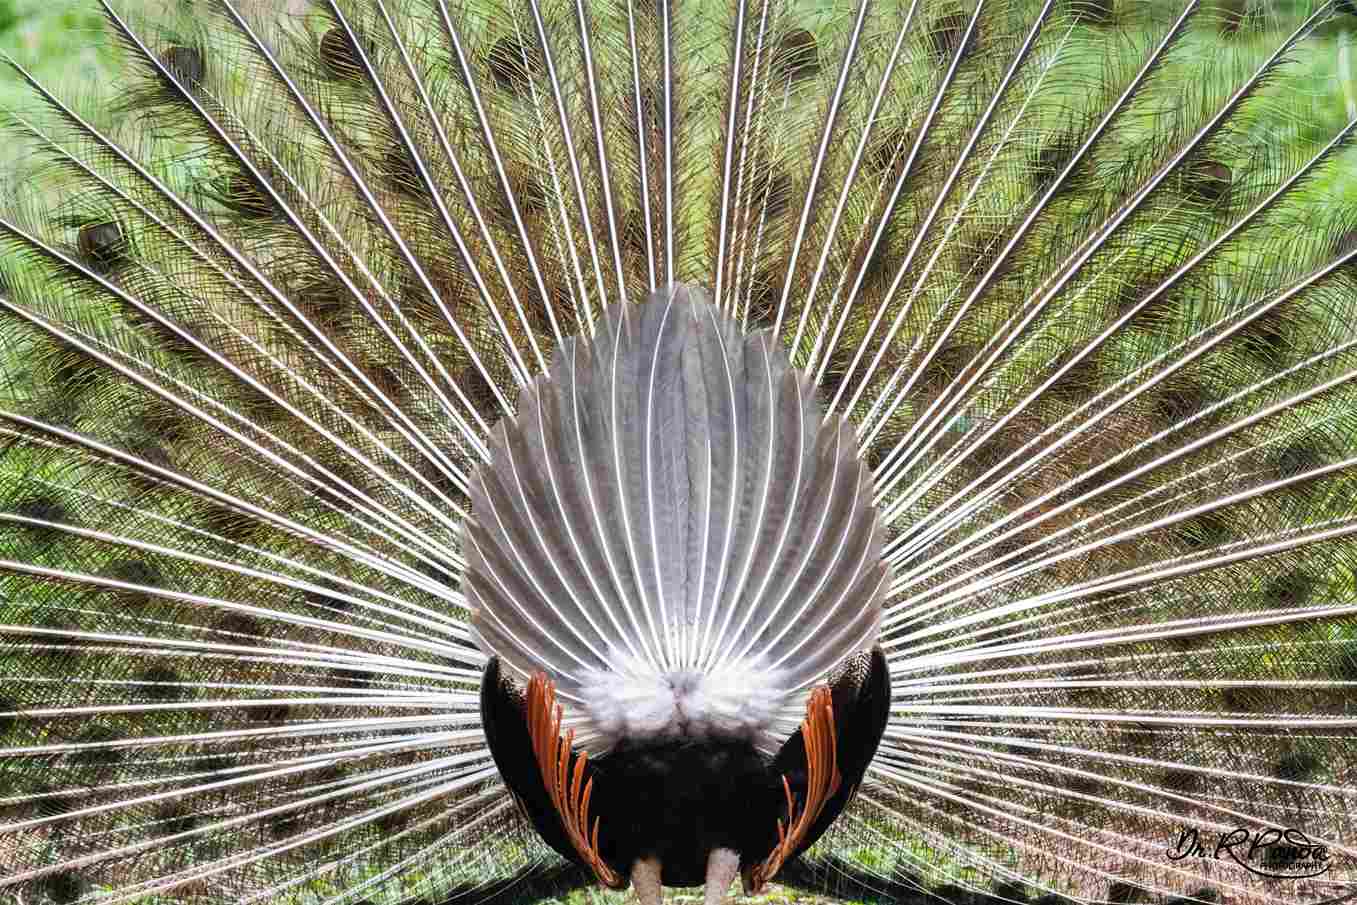 A peacock captured from the rear view